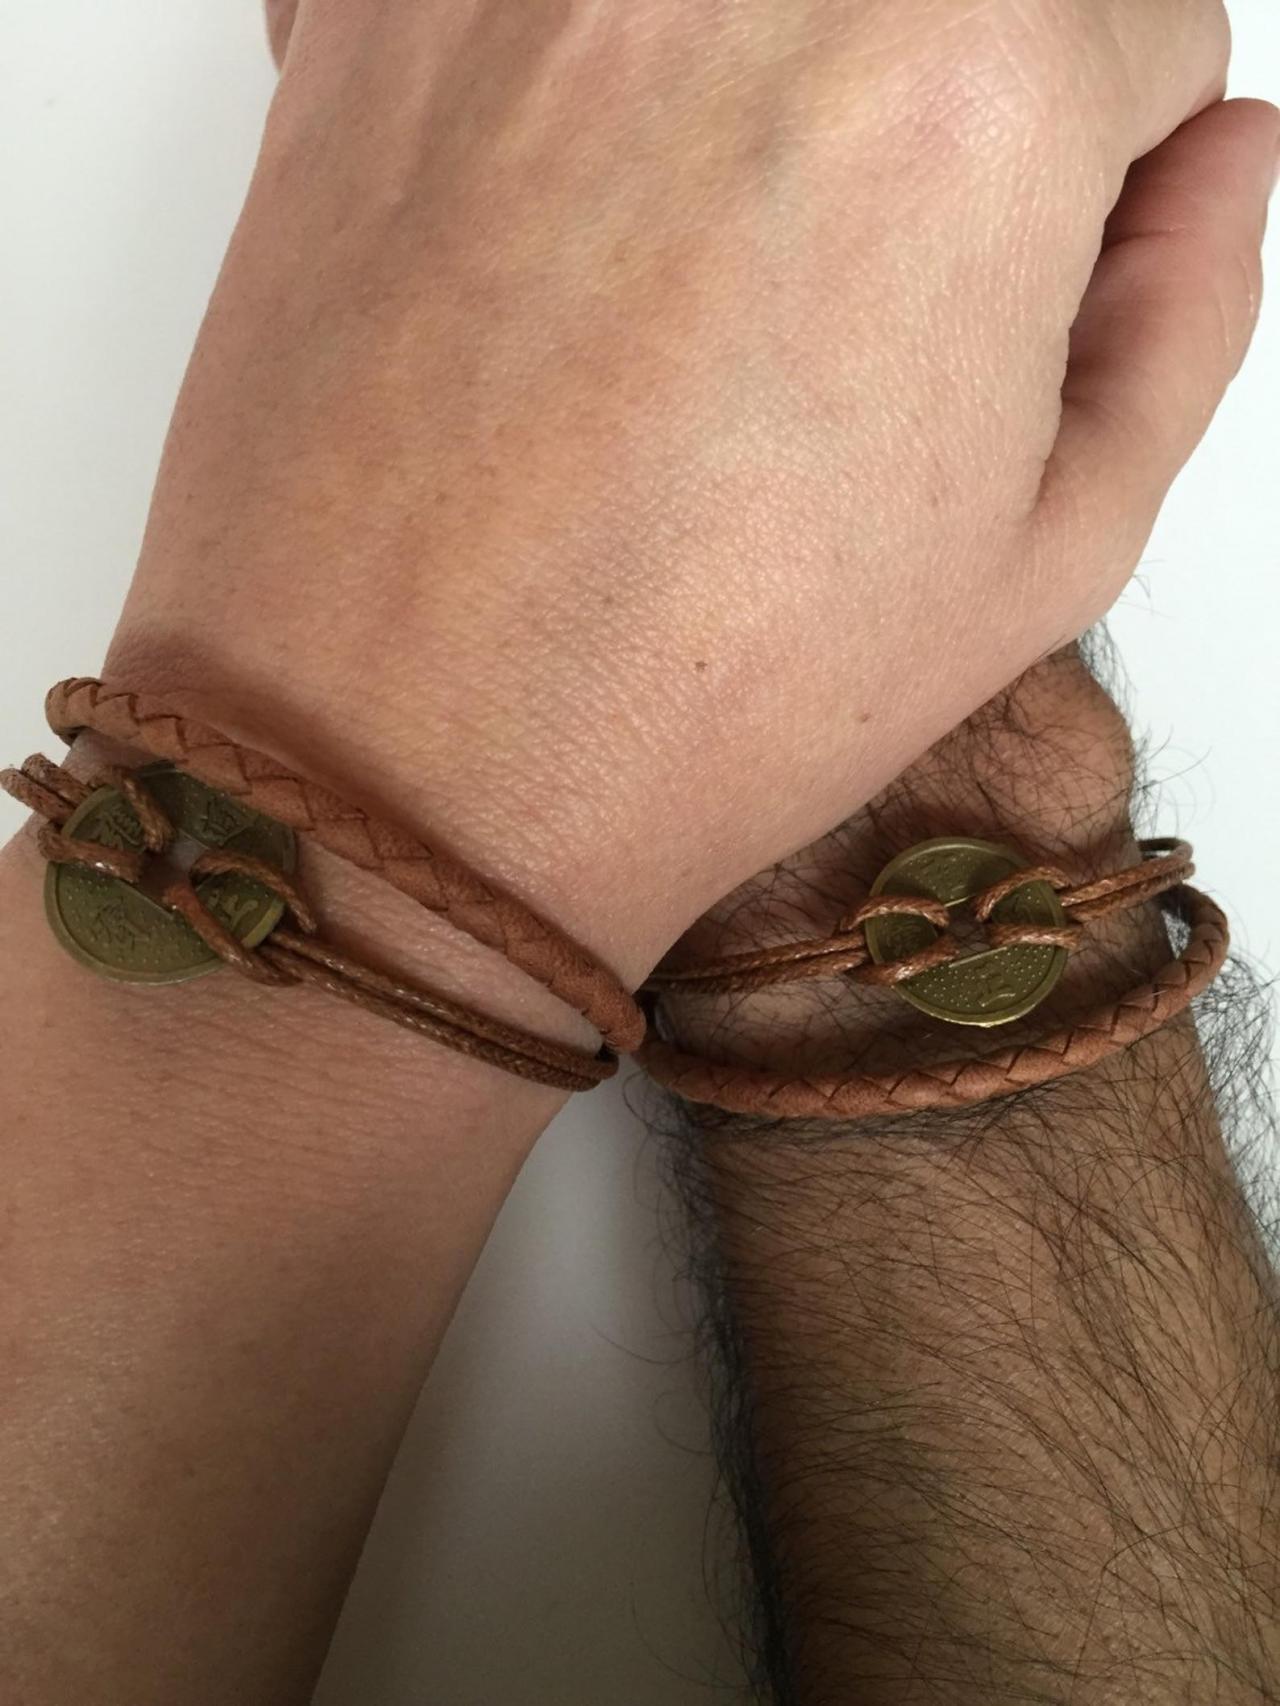 Couples Bracelets 215- Friendship Love Cuff Bronze Chinese Charm Bracelet Leather Braid Gift Adjustable Current Trendy Innovative